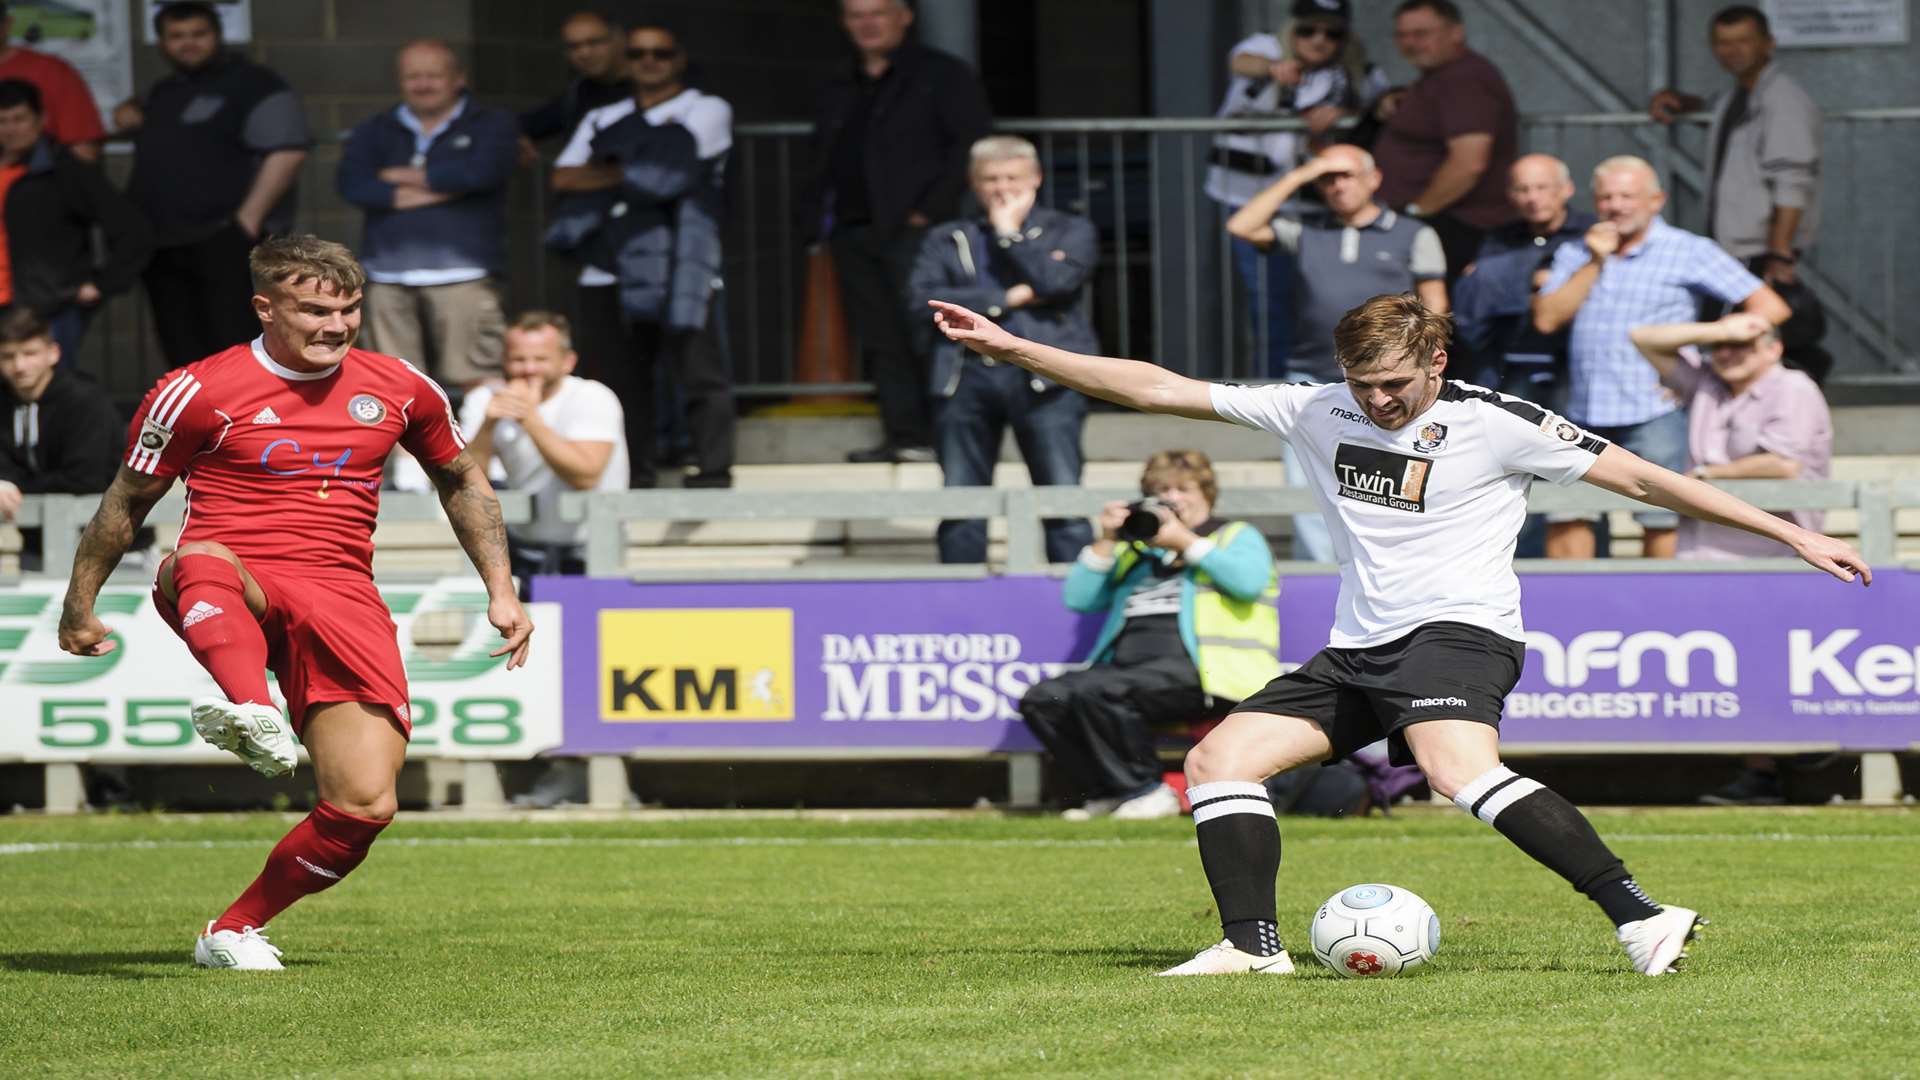 Tom Murphy came off injured after scoring for Dartford at Braintree Picture: Andy Payton